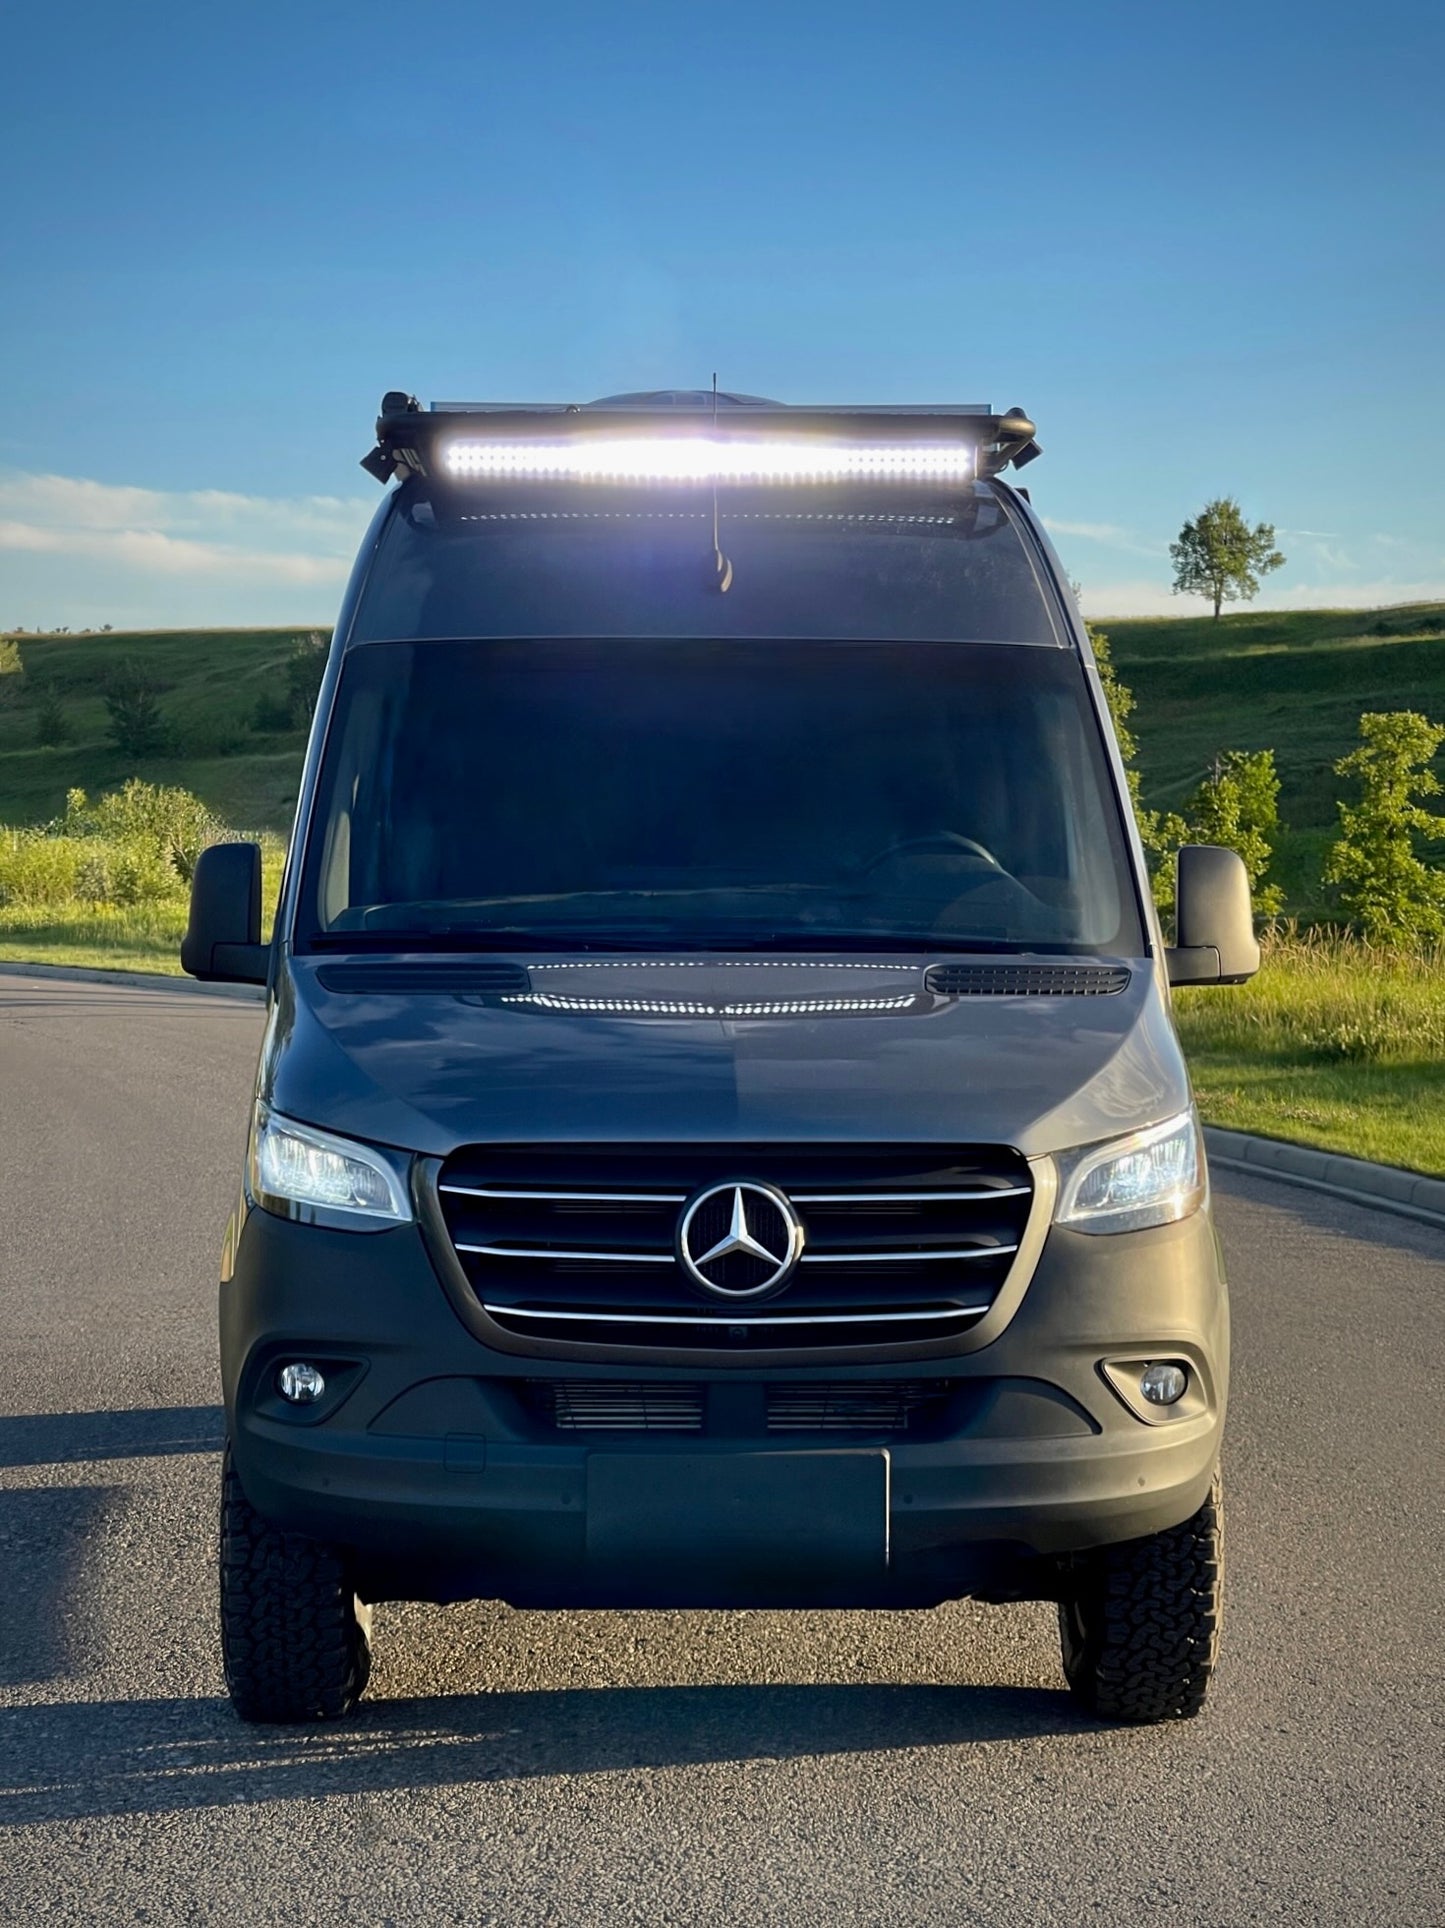 Front view of Eagle Series sprinter roof rack